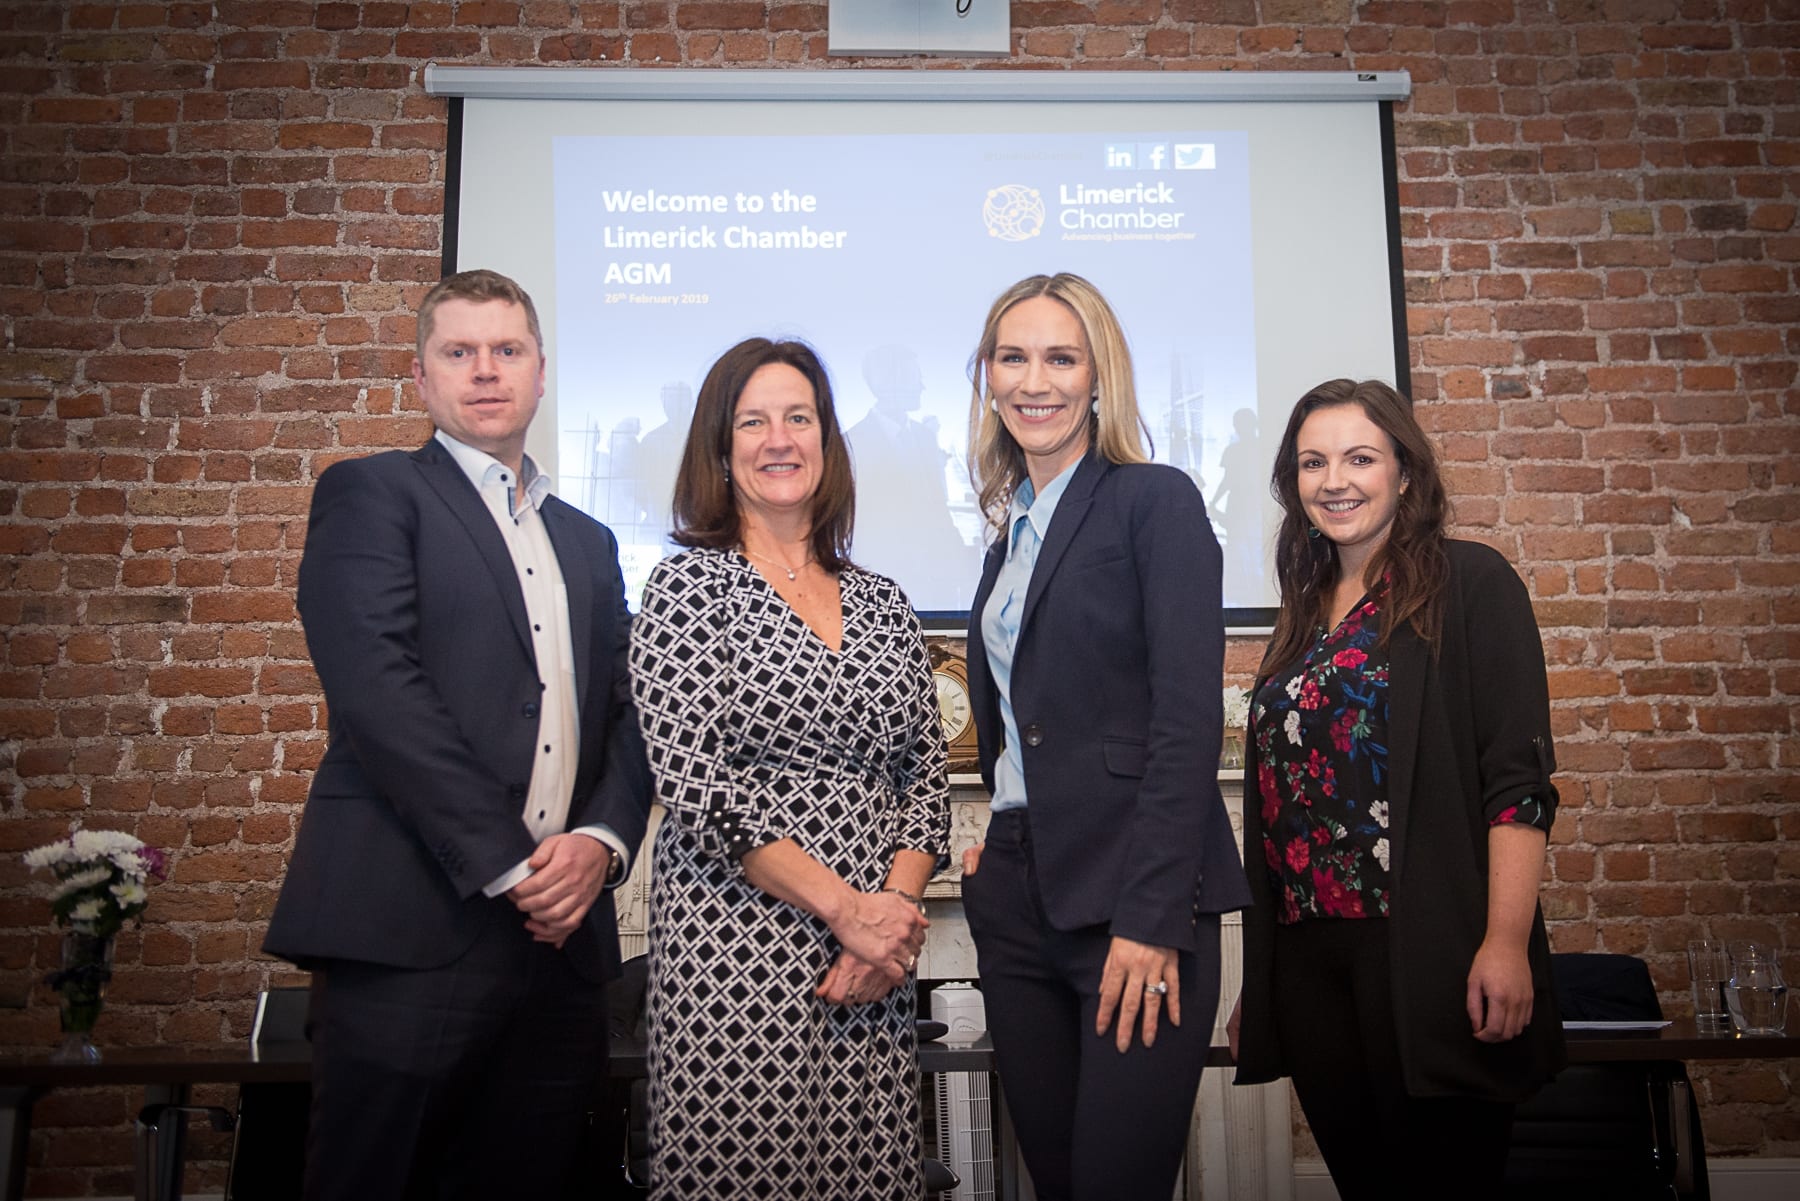 Limerick Chamber AGM which took place in the Limerick Chamber Boardroom on Tuesday 27th Feb 2019:  From left to right:  Eoin Ryan - Incoming President Limerick Chamber, Dr Mary Shire - Outgoing President Limerick Chamber, Deirdre Ryan - CEO Limerick Chamber, Dr Catriona Cahill - Economist Limerick Chamber,
Image by Morning Star Photography